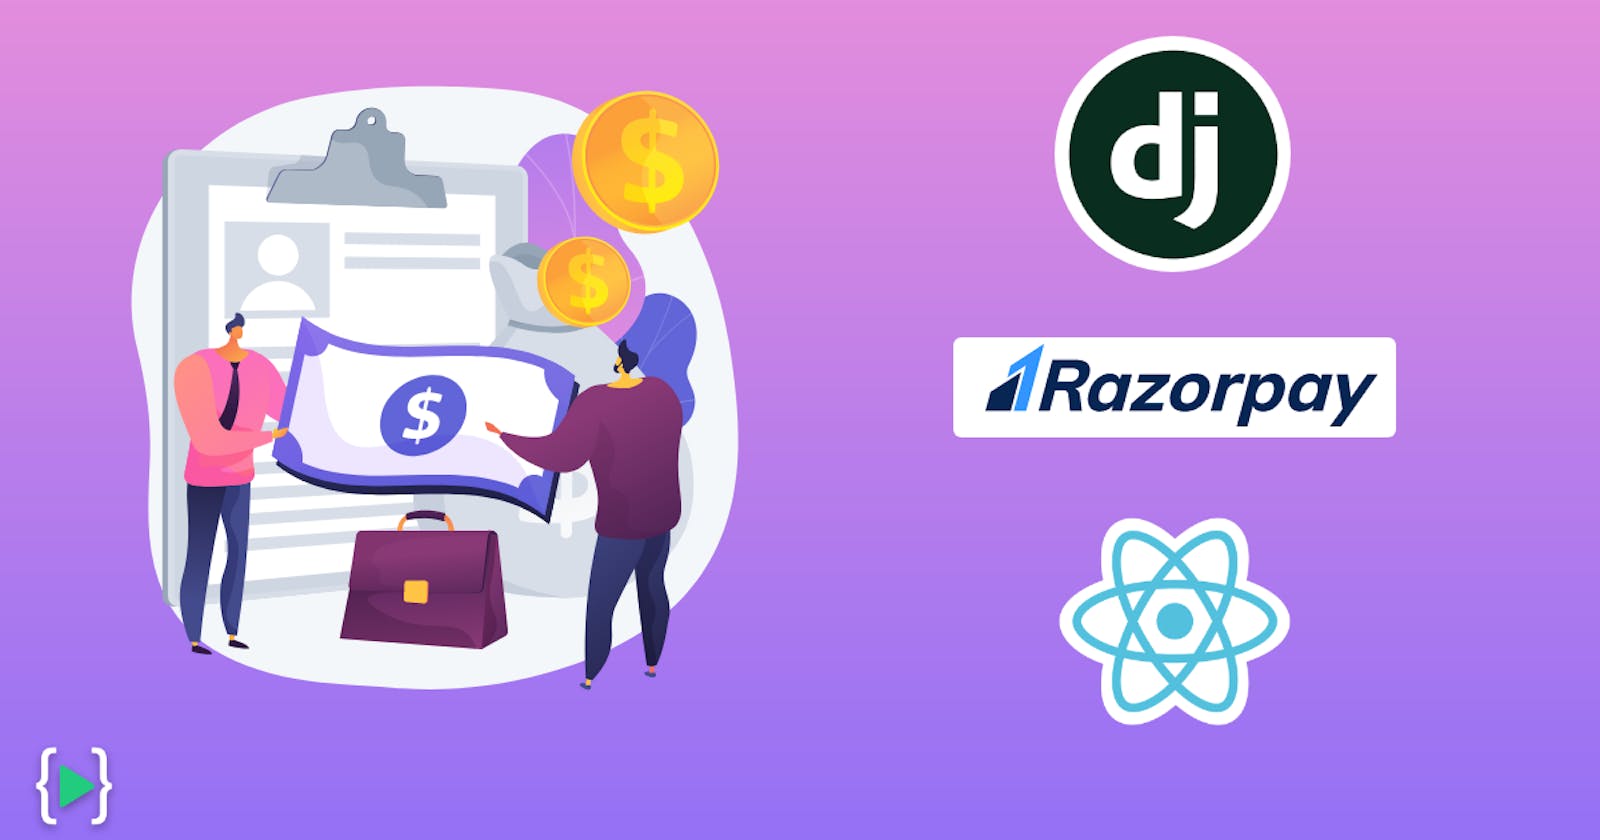 How to integrate Razorpay payment gateway with Django REST framework and React.Js